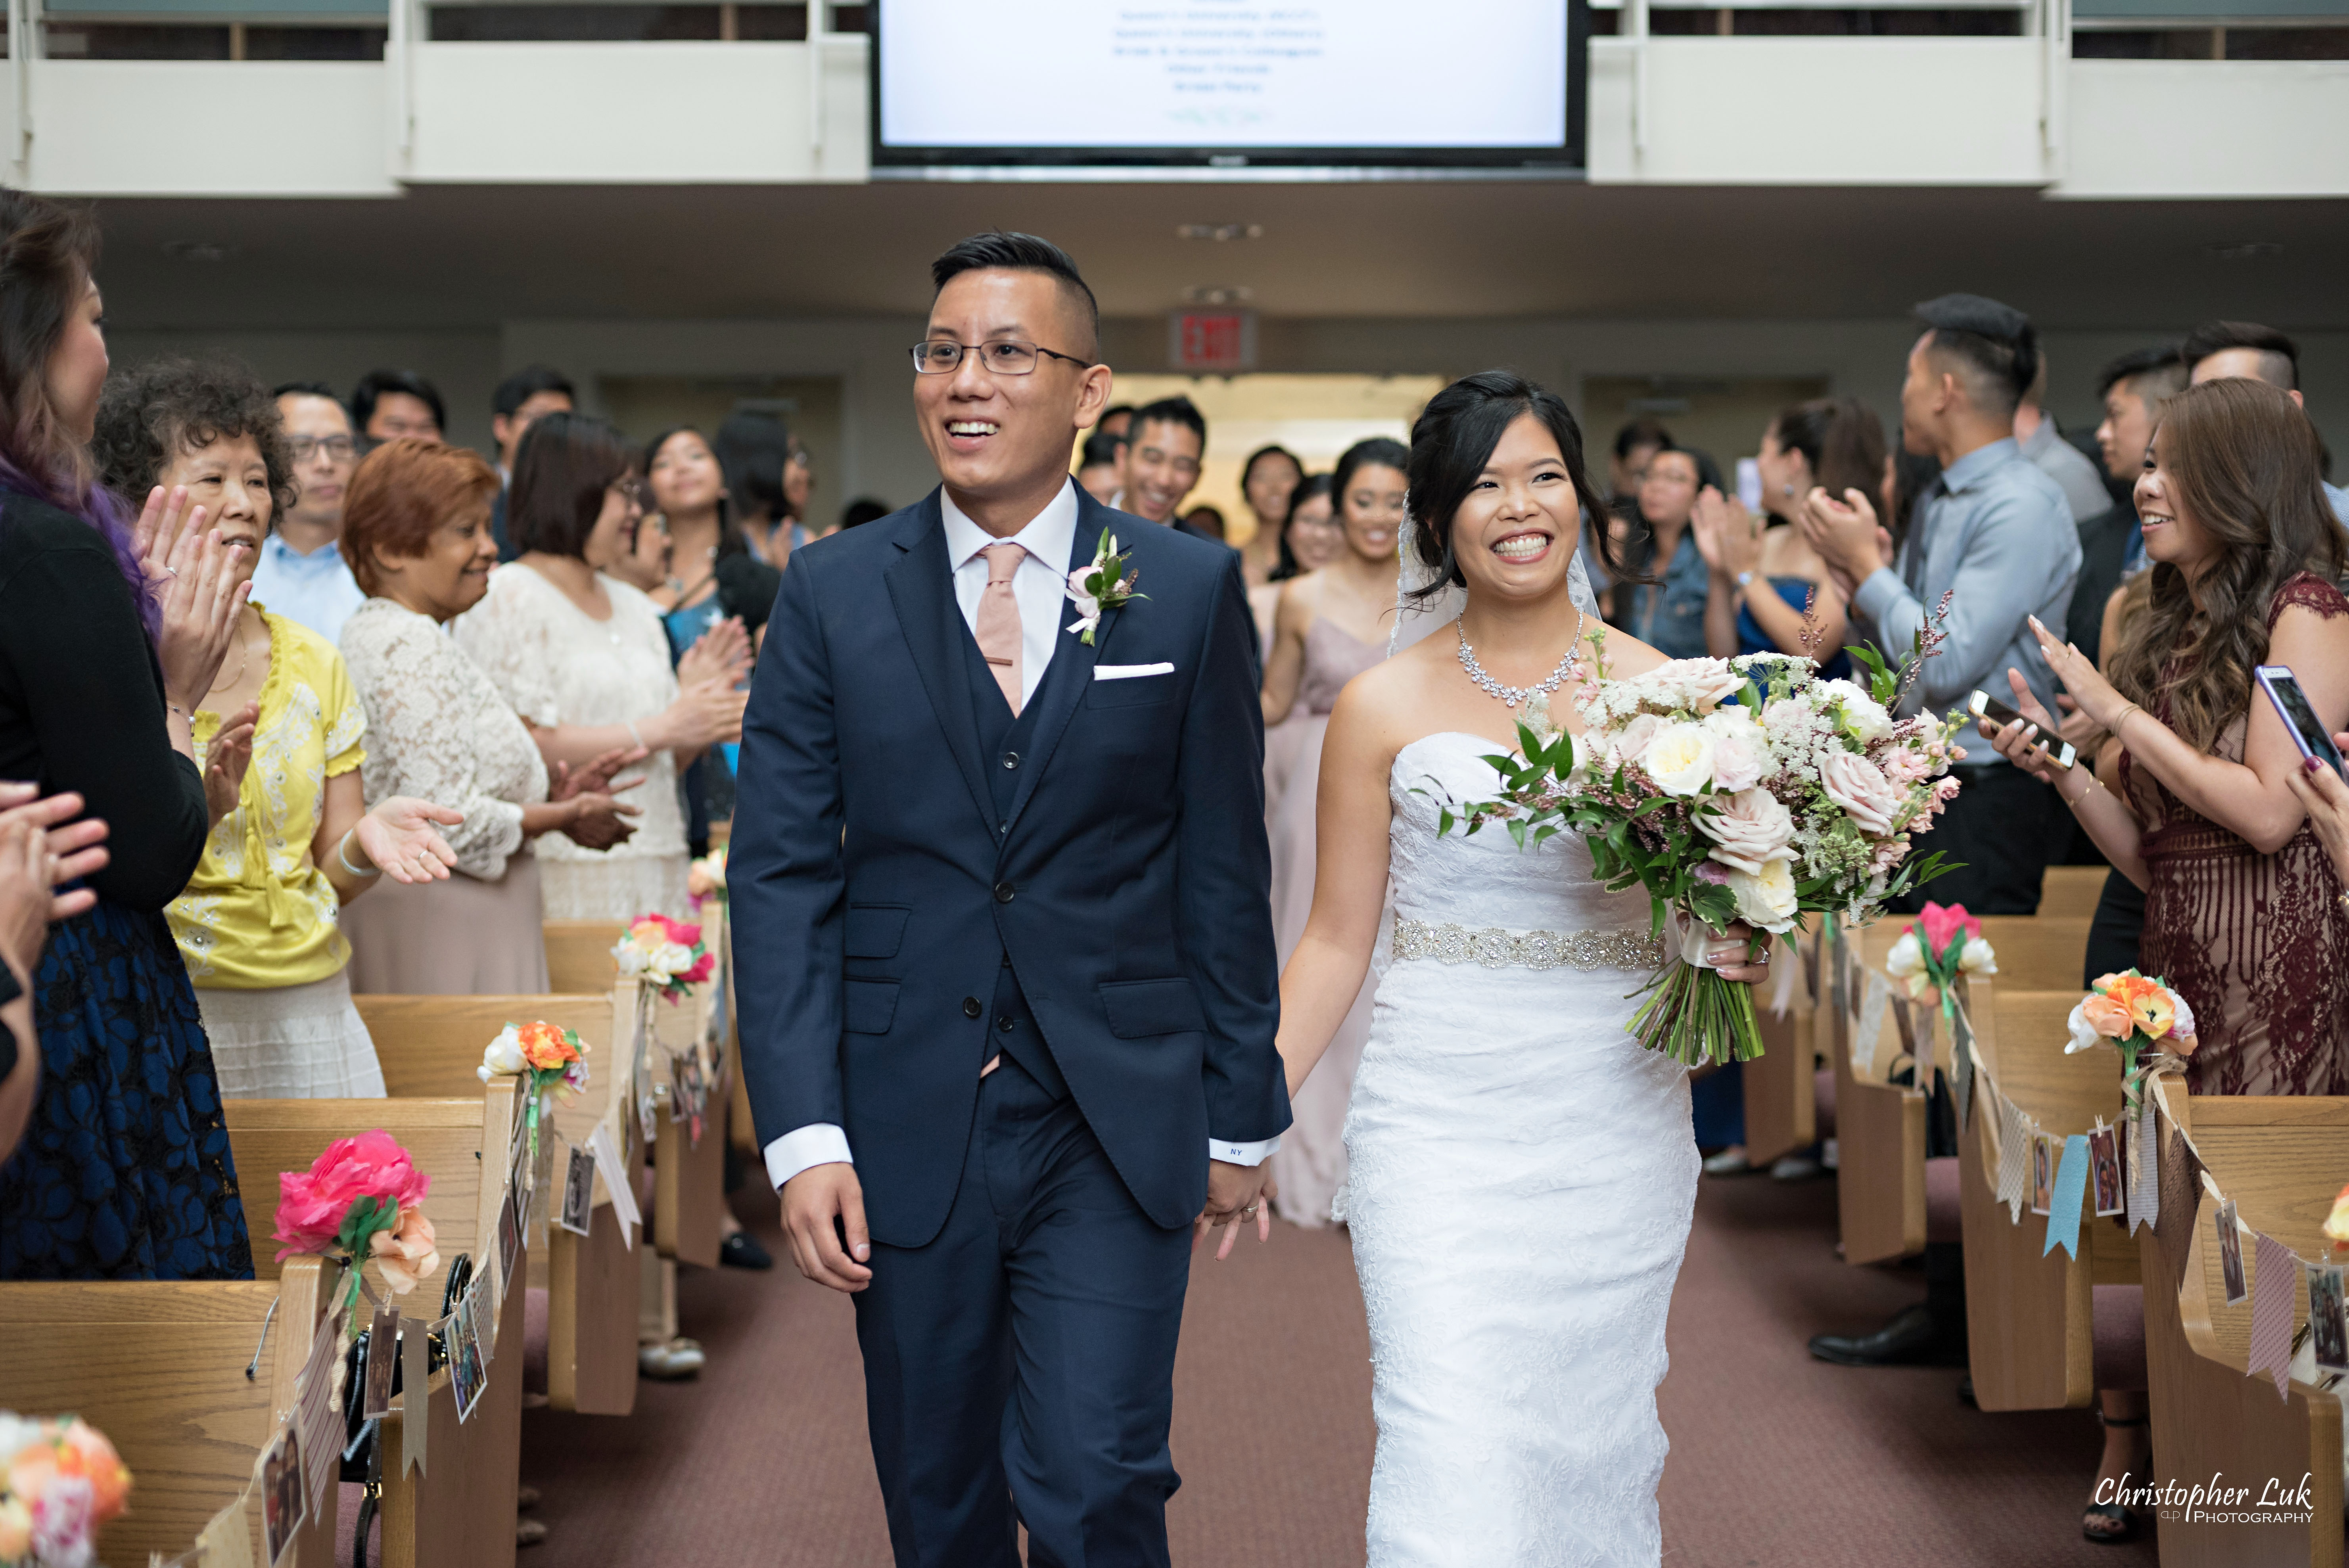 Christopher Luk - Toronto Wedding Photographer - Markham Chinese Baptist Church MCBC Christian Ceremony - Natural Candid Photojournalistic Bride Groom Processional Recessional Grand Entrance Smile Clapping Celebration Standing Ovation